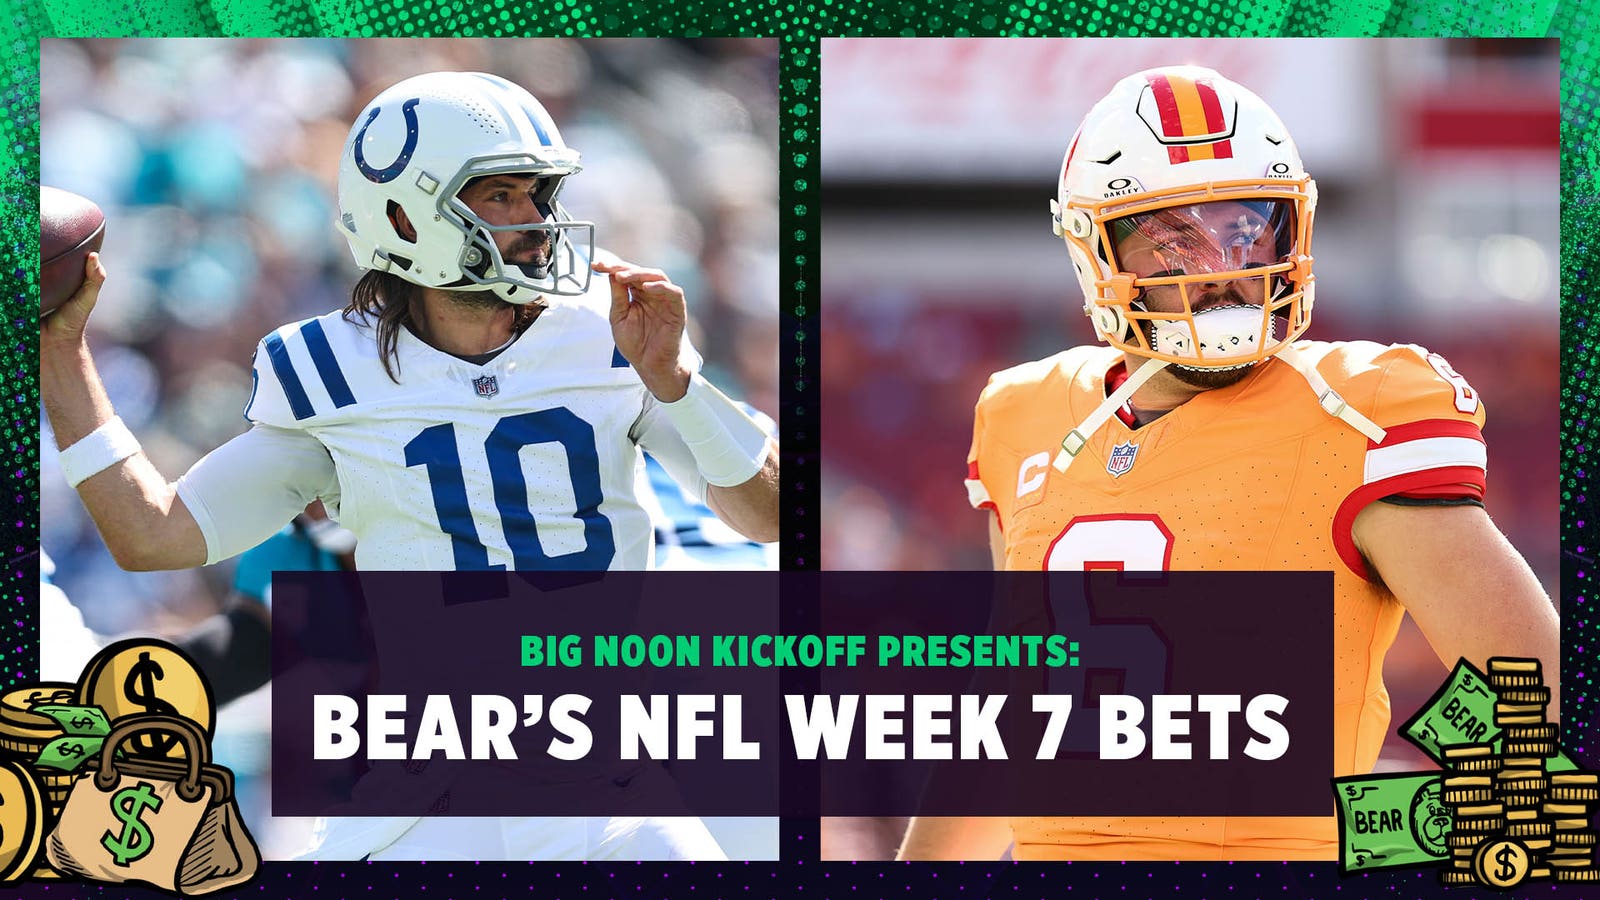 Browns at Colts, Falcons at Buccaneers and more best bets of NFL Week 7 